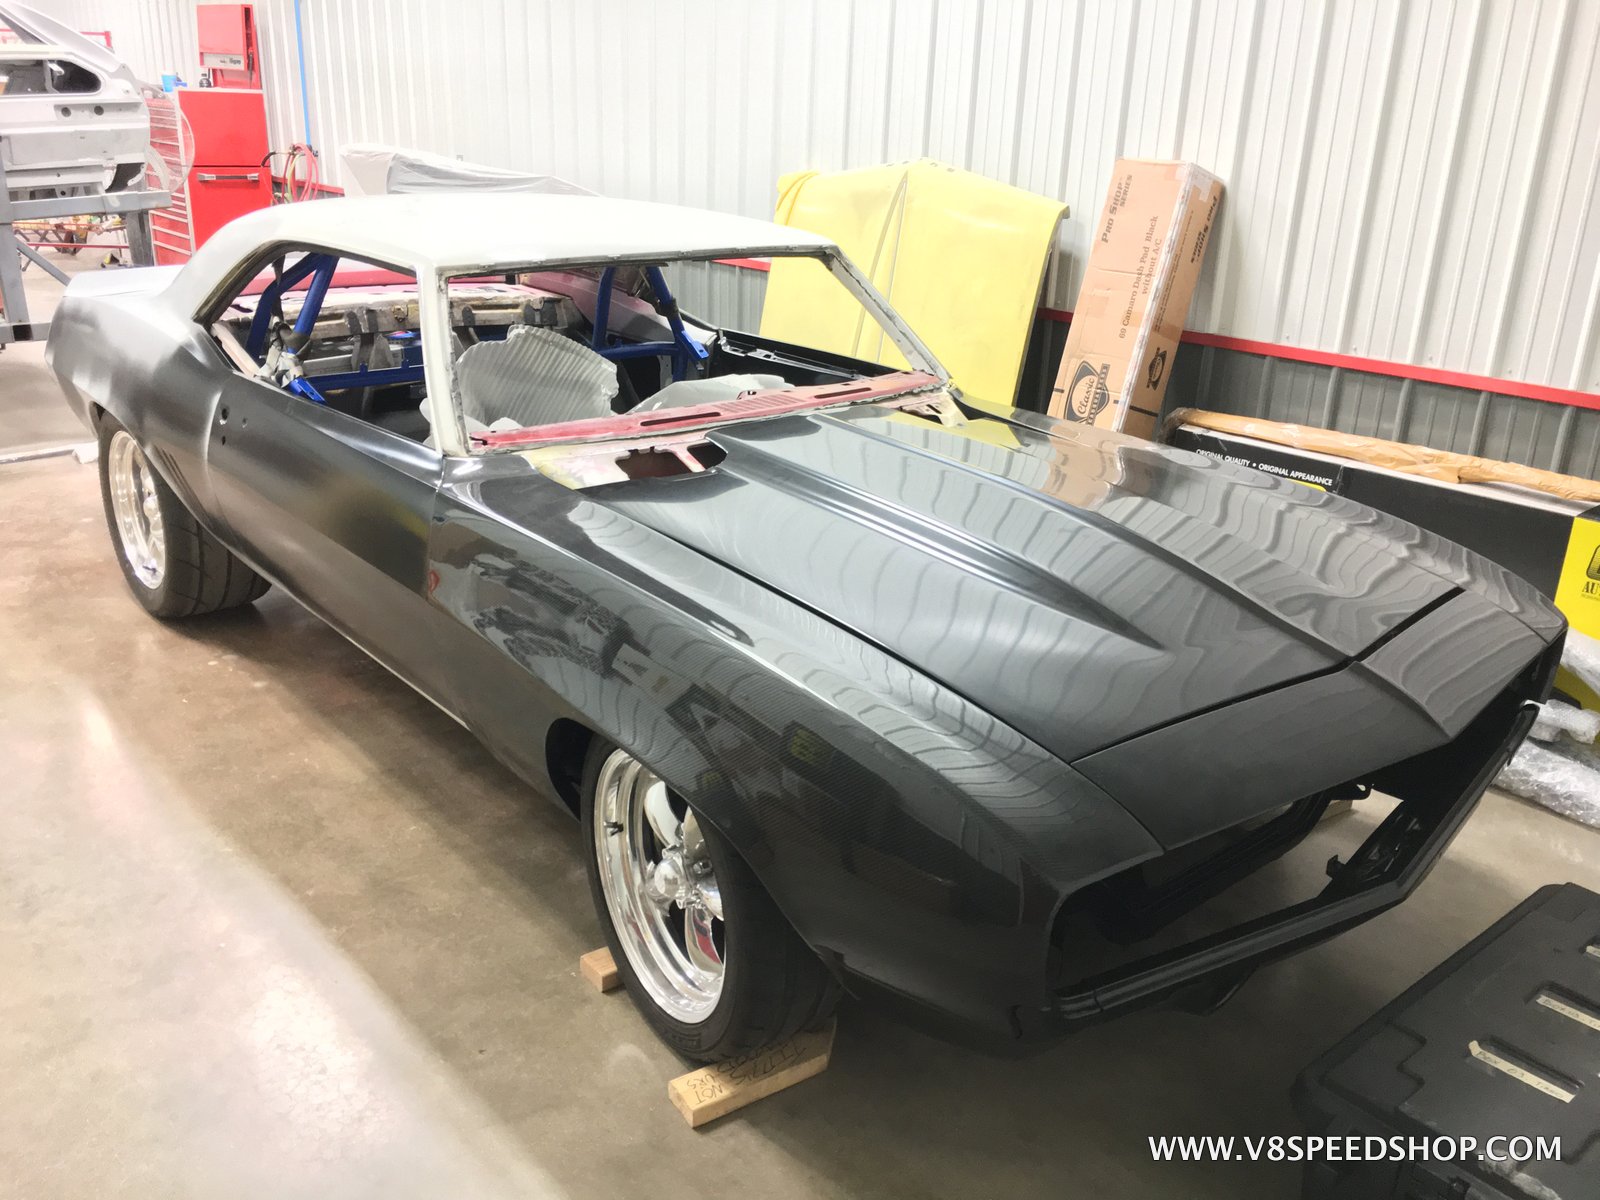 1969 Chevrolet Camaro Fabrication, Bodywork, and Paint at the V8 Speed and Resto Shop